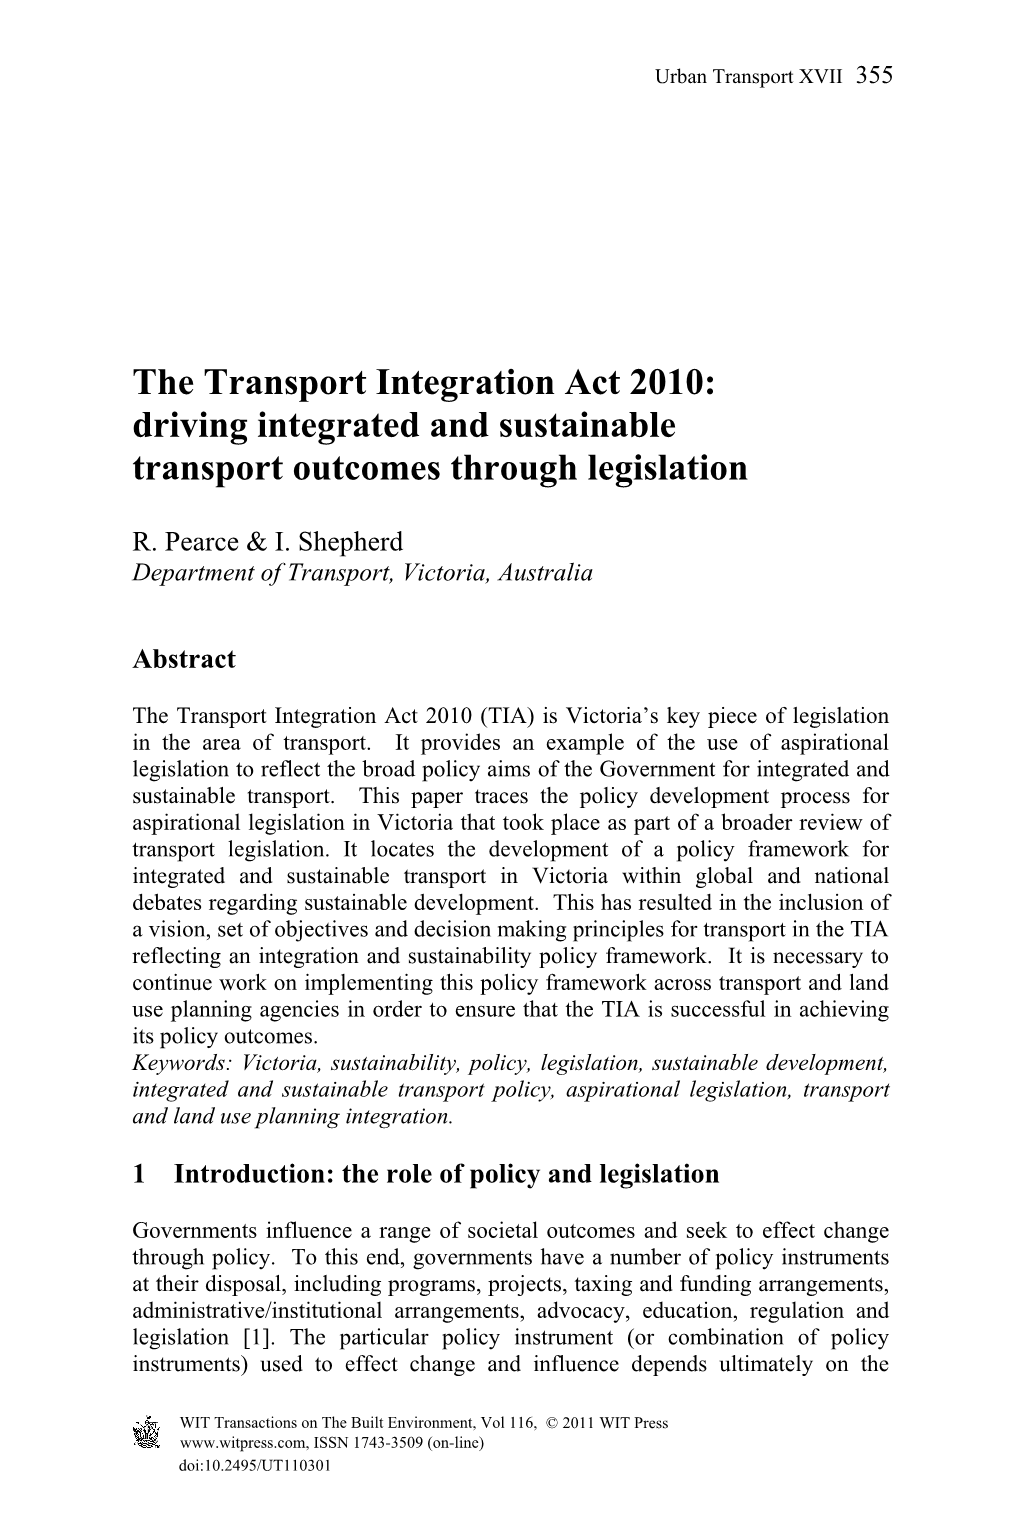 The Transport Integration Act 2010: Driving Integrated and Sustainable Transport Outcomes Through Legislation